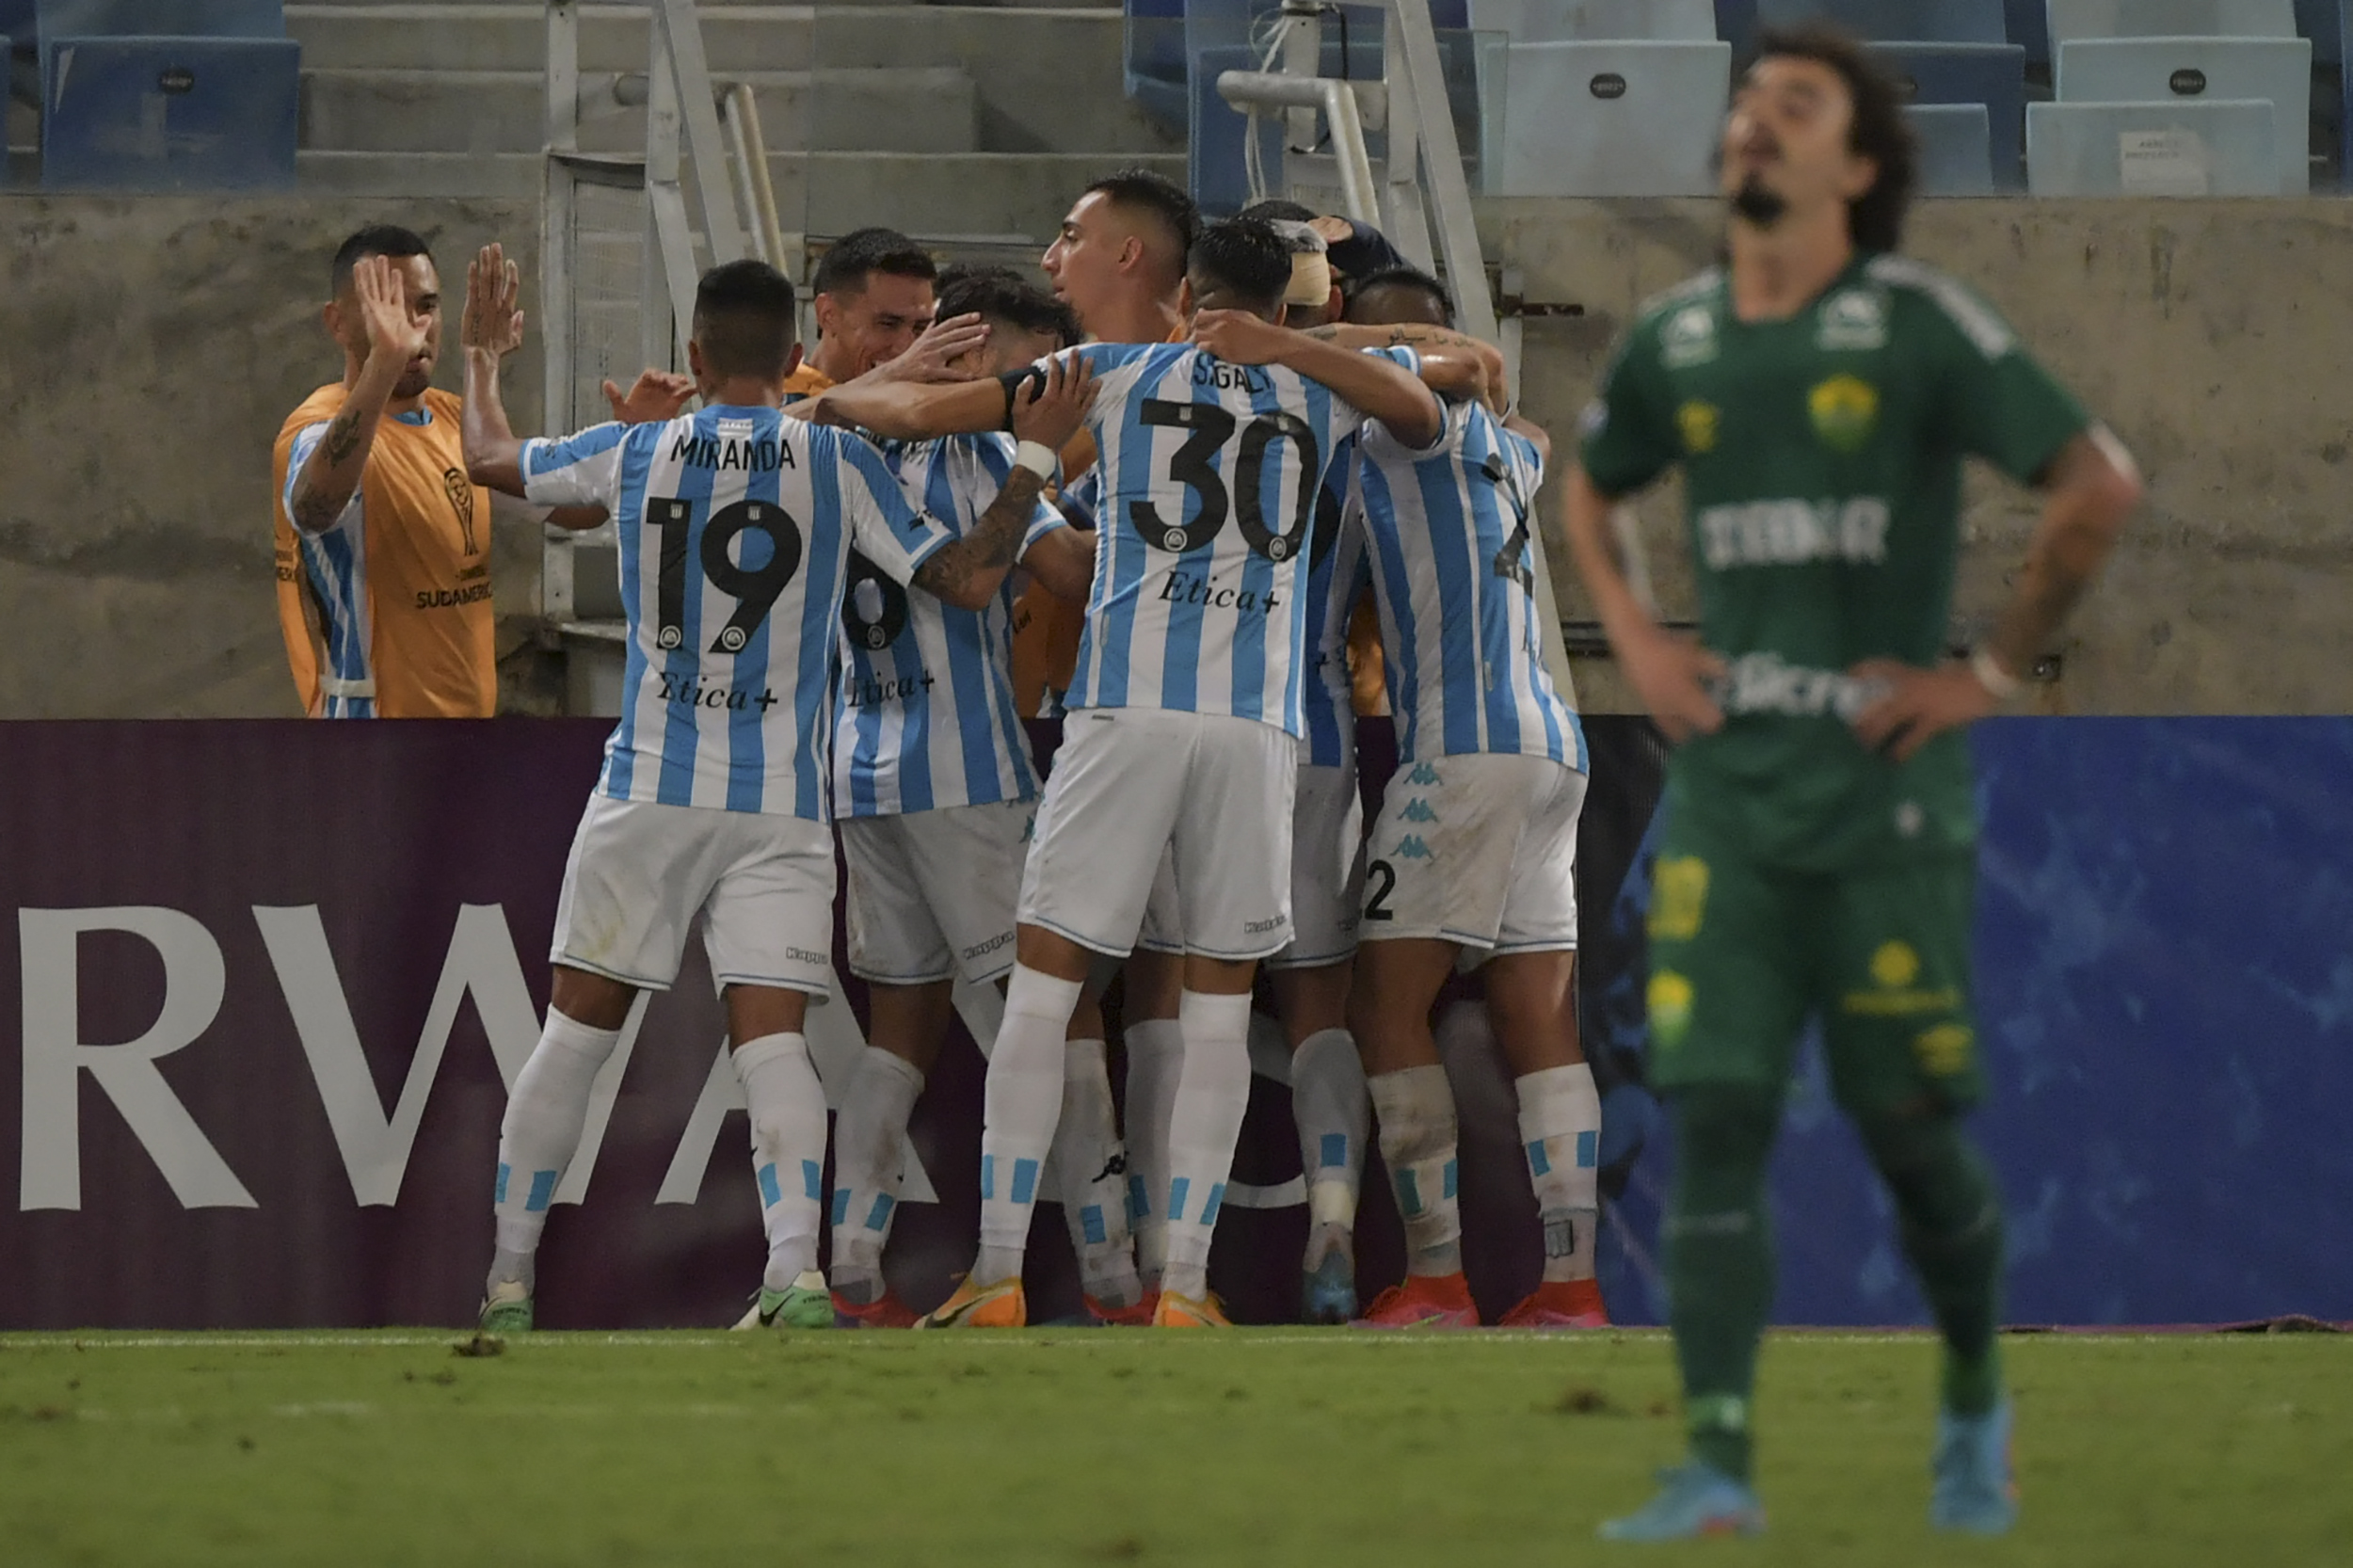 Argentina's Racing players celebrate after scoring against Brazil's Cuiaba during the Copa Sudamericana group stage football match at the Pantanal Arena in Cuiaba, Brazil, on May 3, 2022. (Photo by NELSON ALMEIDA / AFP) (Photo by NELSON ALMEIDA/AFP via Getty Images)